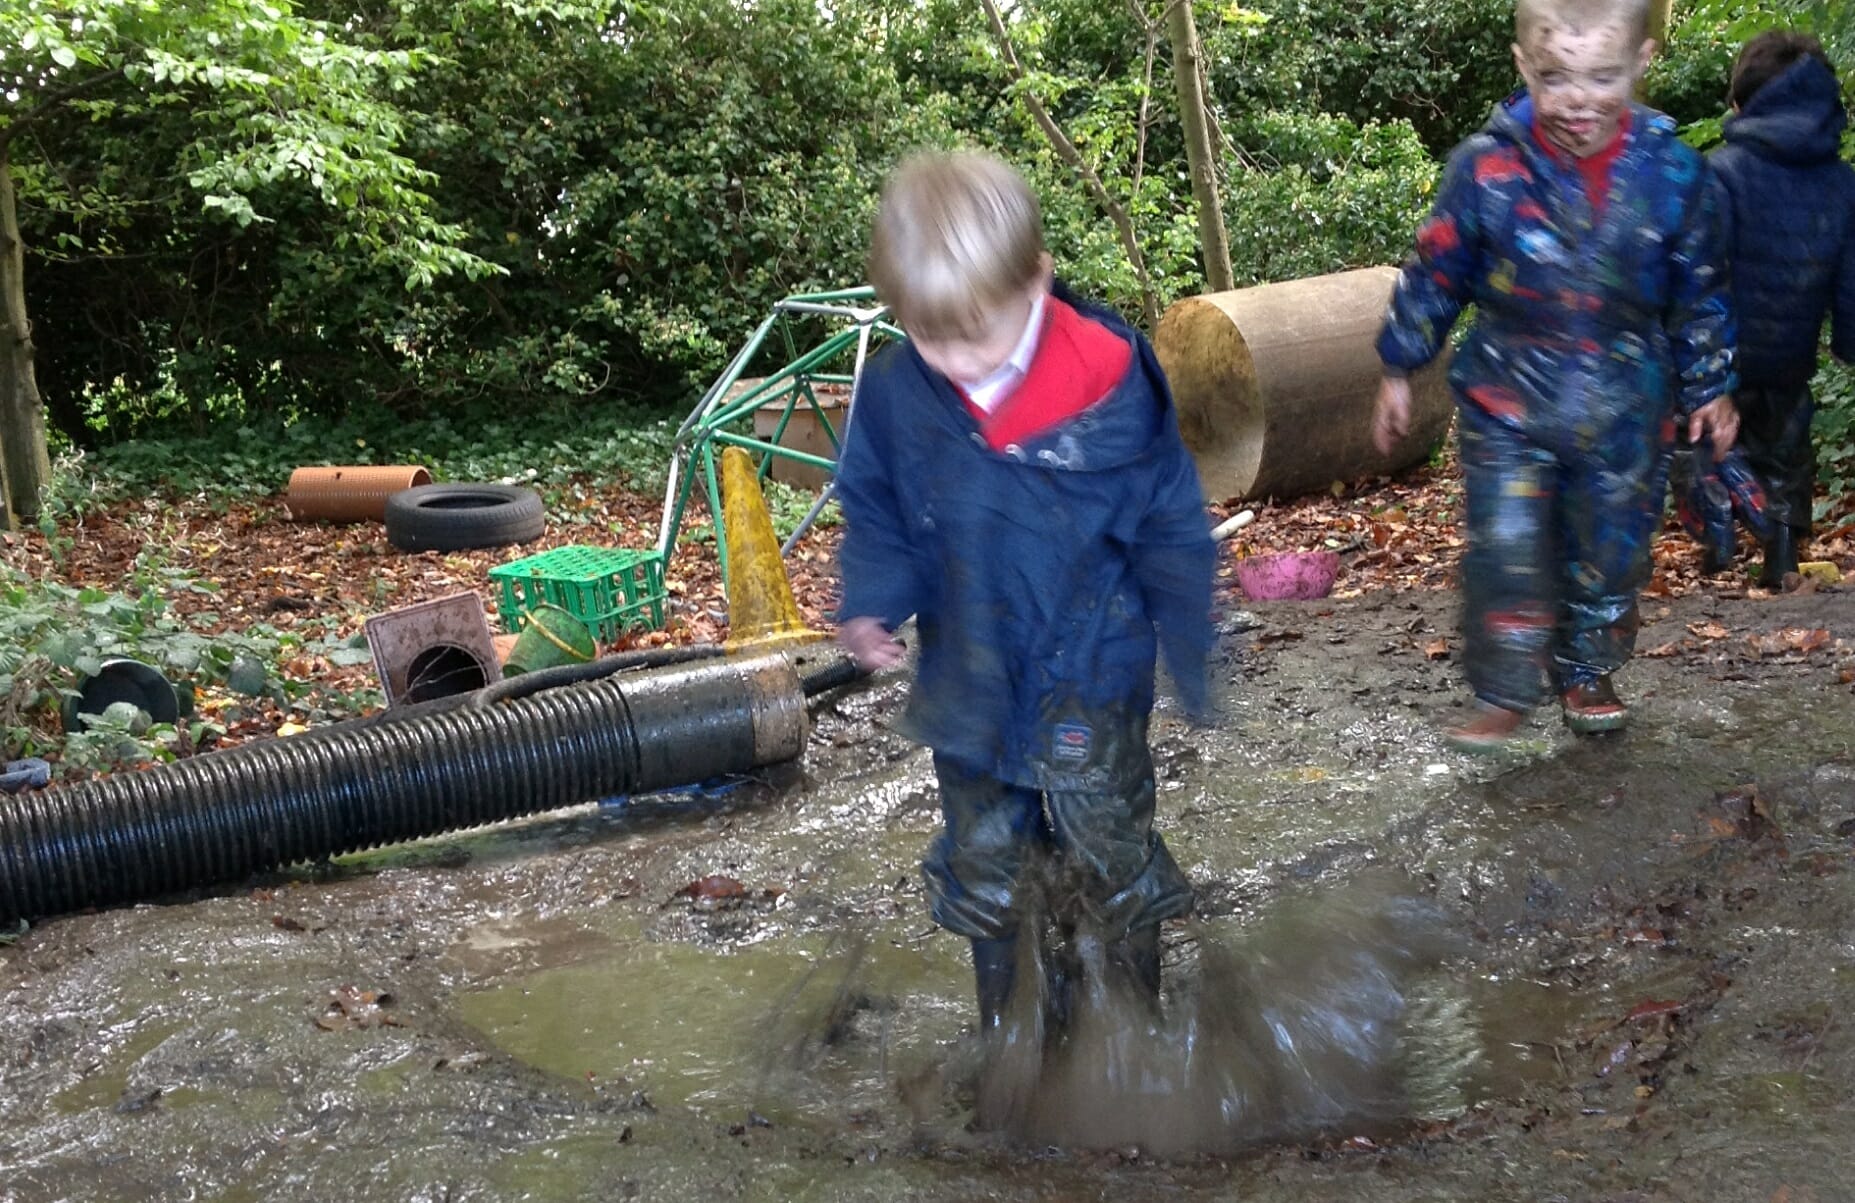 Forest School – Its importance in the curriculum